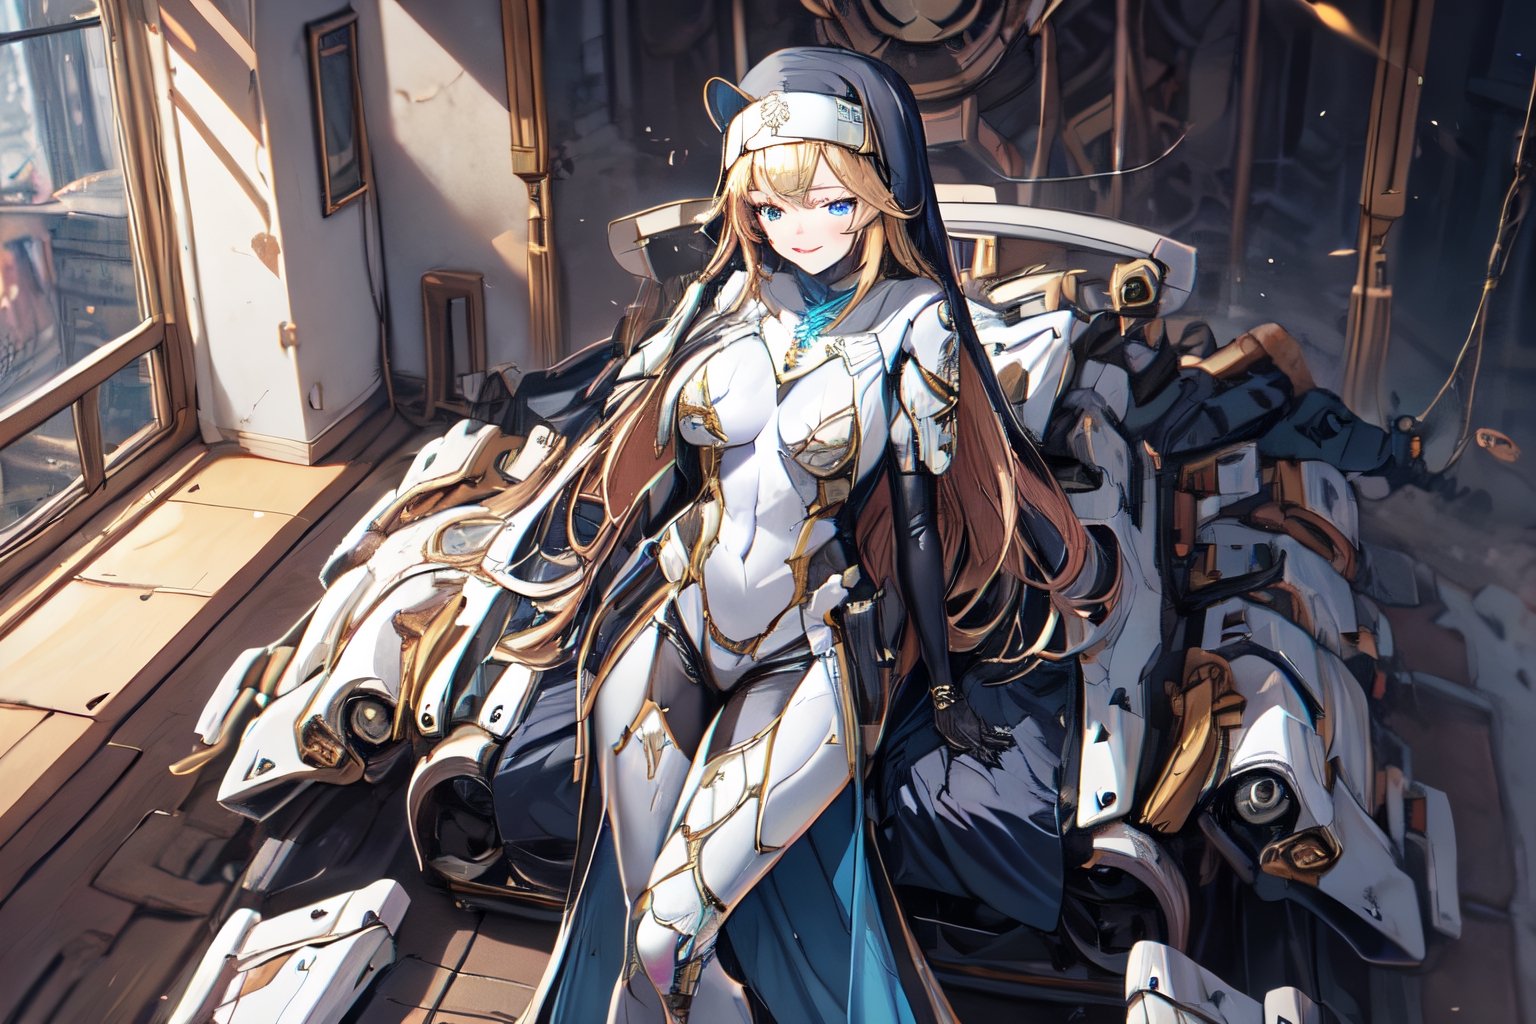 1 girl, Nun hat, long bread blond hair, blue eyes, smile, white ligerie, black armor gloves, white panty, church room, outside, white armor boot, lie down on bed, 8k, high res, , 2 hands, bare leg, bare, nun garb, chest, big chest, breasts_exposed, exposed_pussy, bare_foot 